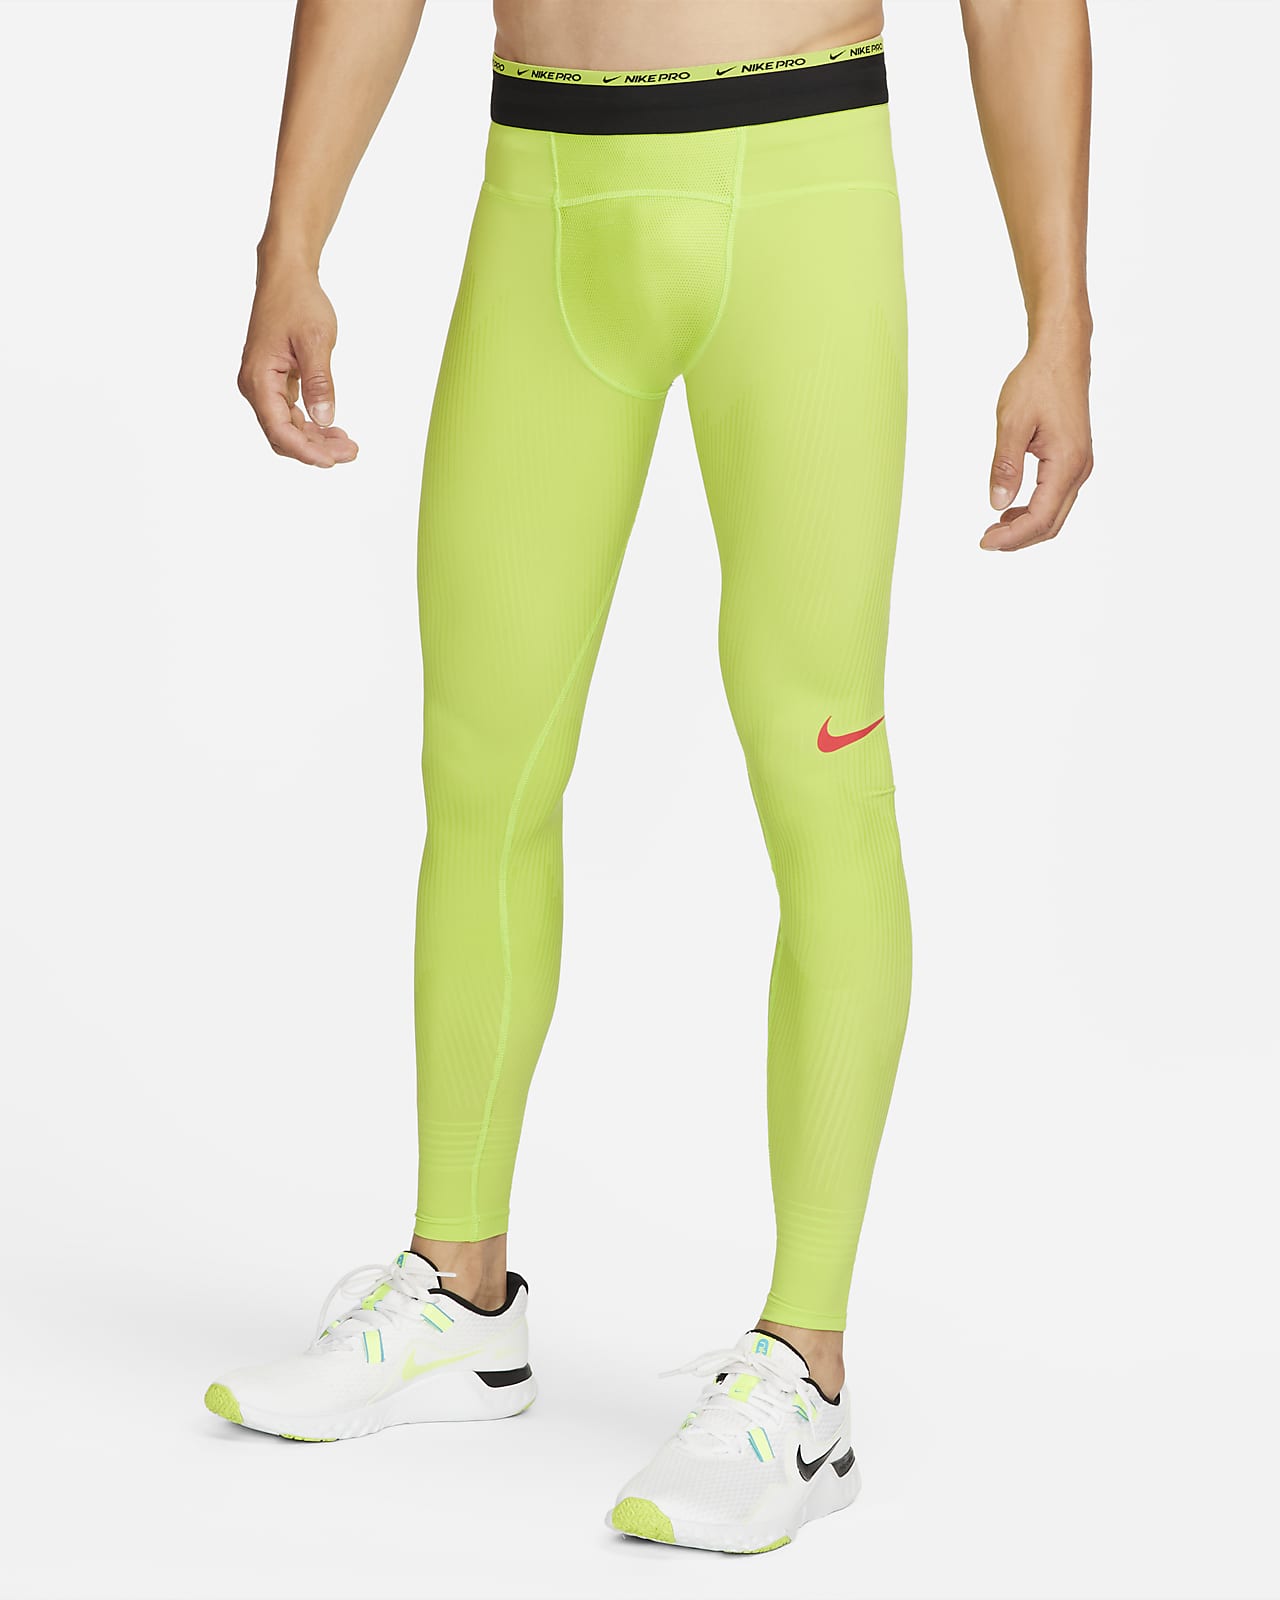 nike pro tights for men